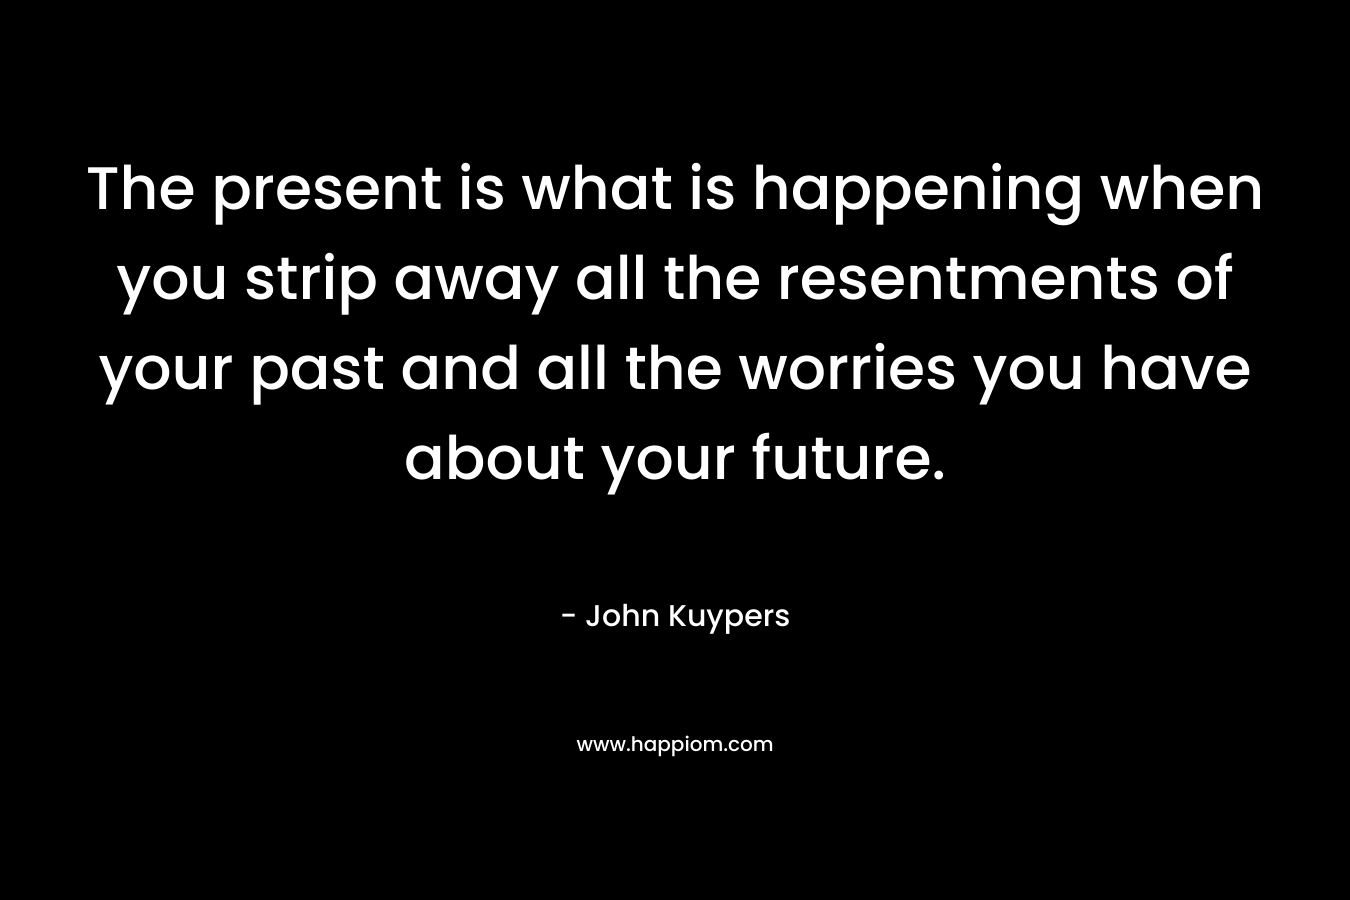 The present is what is happening when you strip away all the resentments of your past and all the worries you have about your future. – John Kuypers